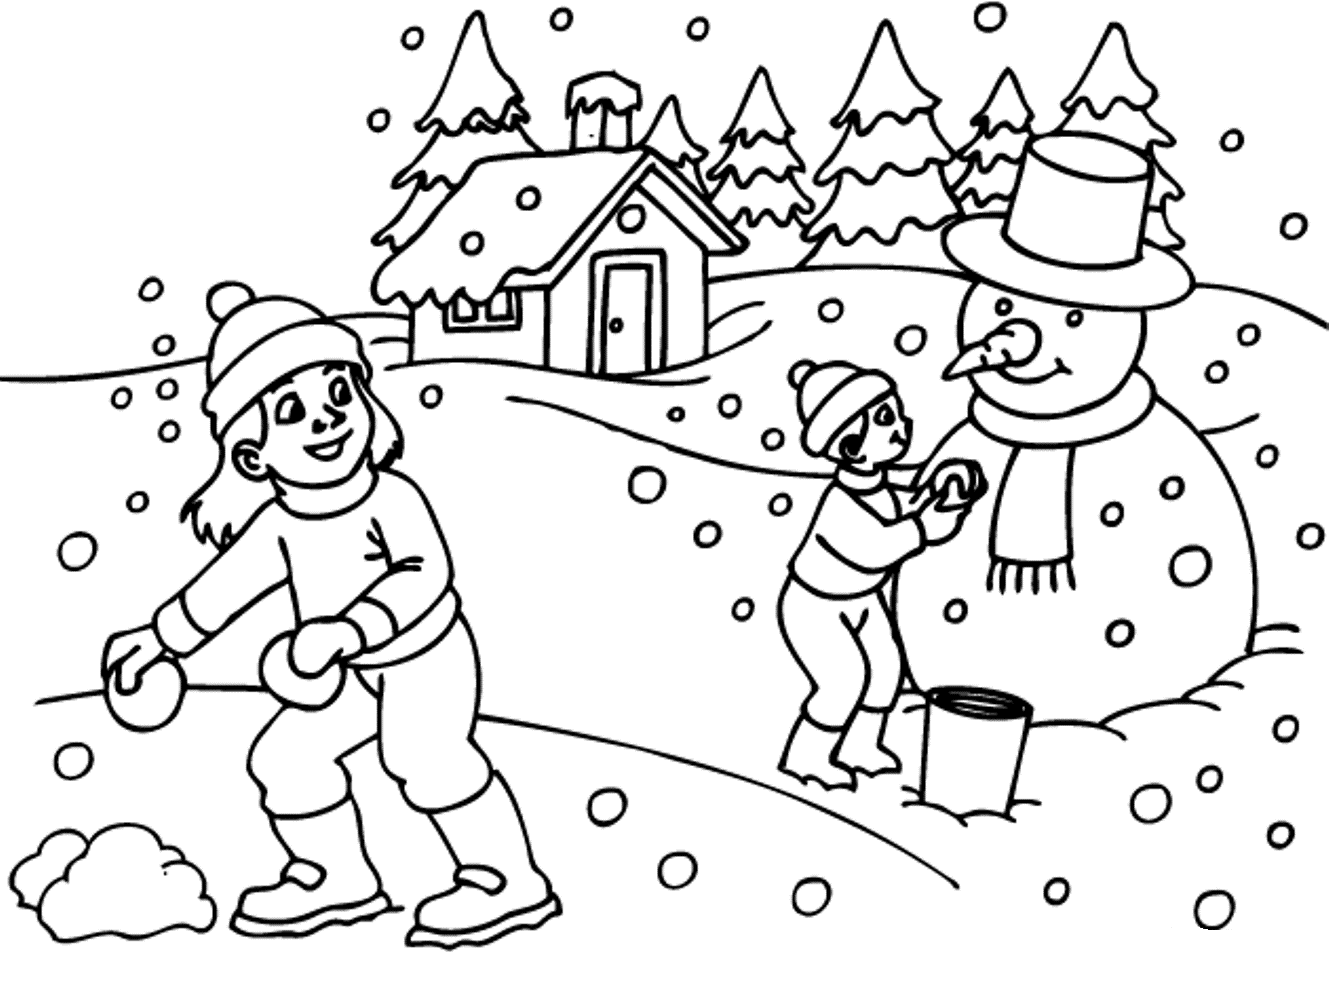 Nature Coloring Pages Archives - Page 3 of 5 - ColoringPagehub